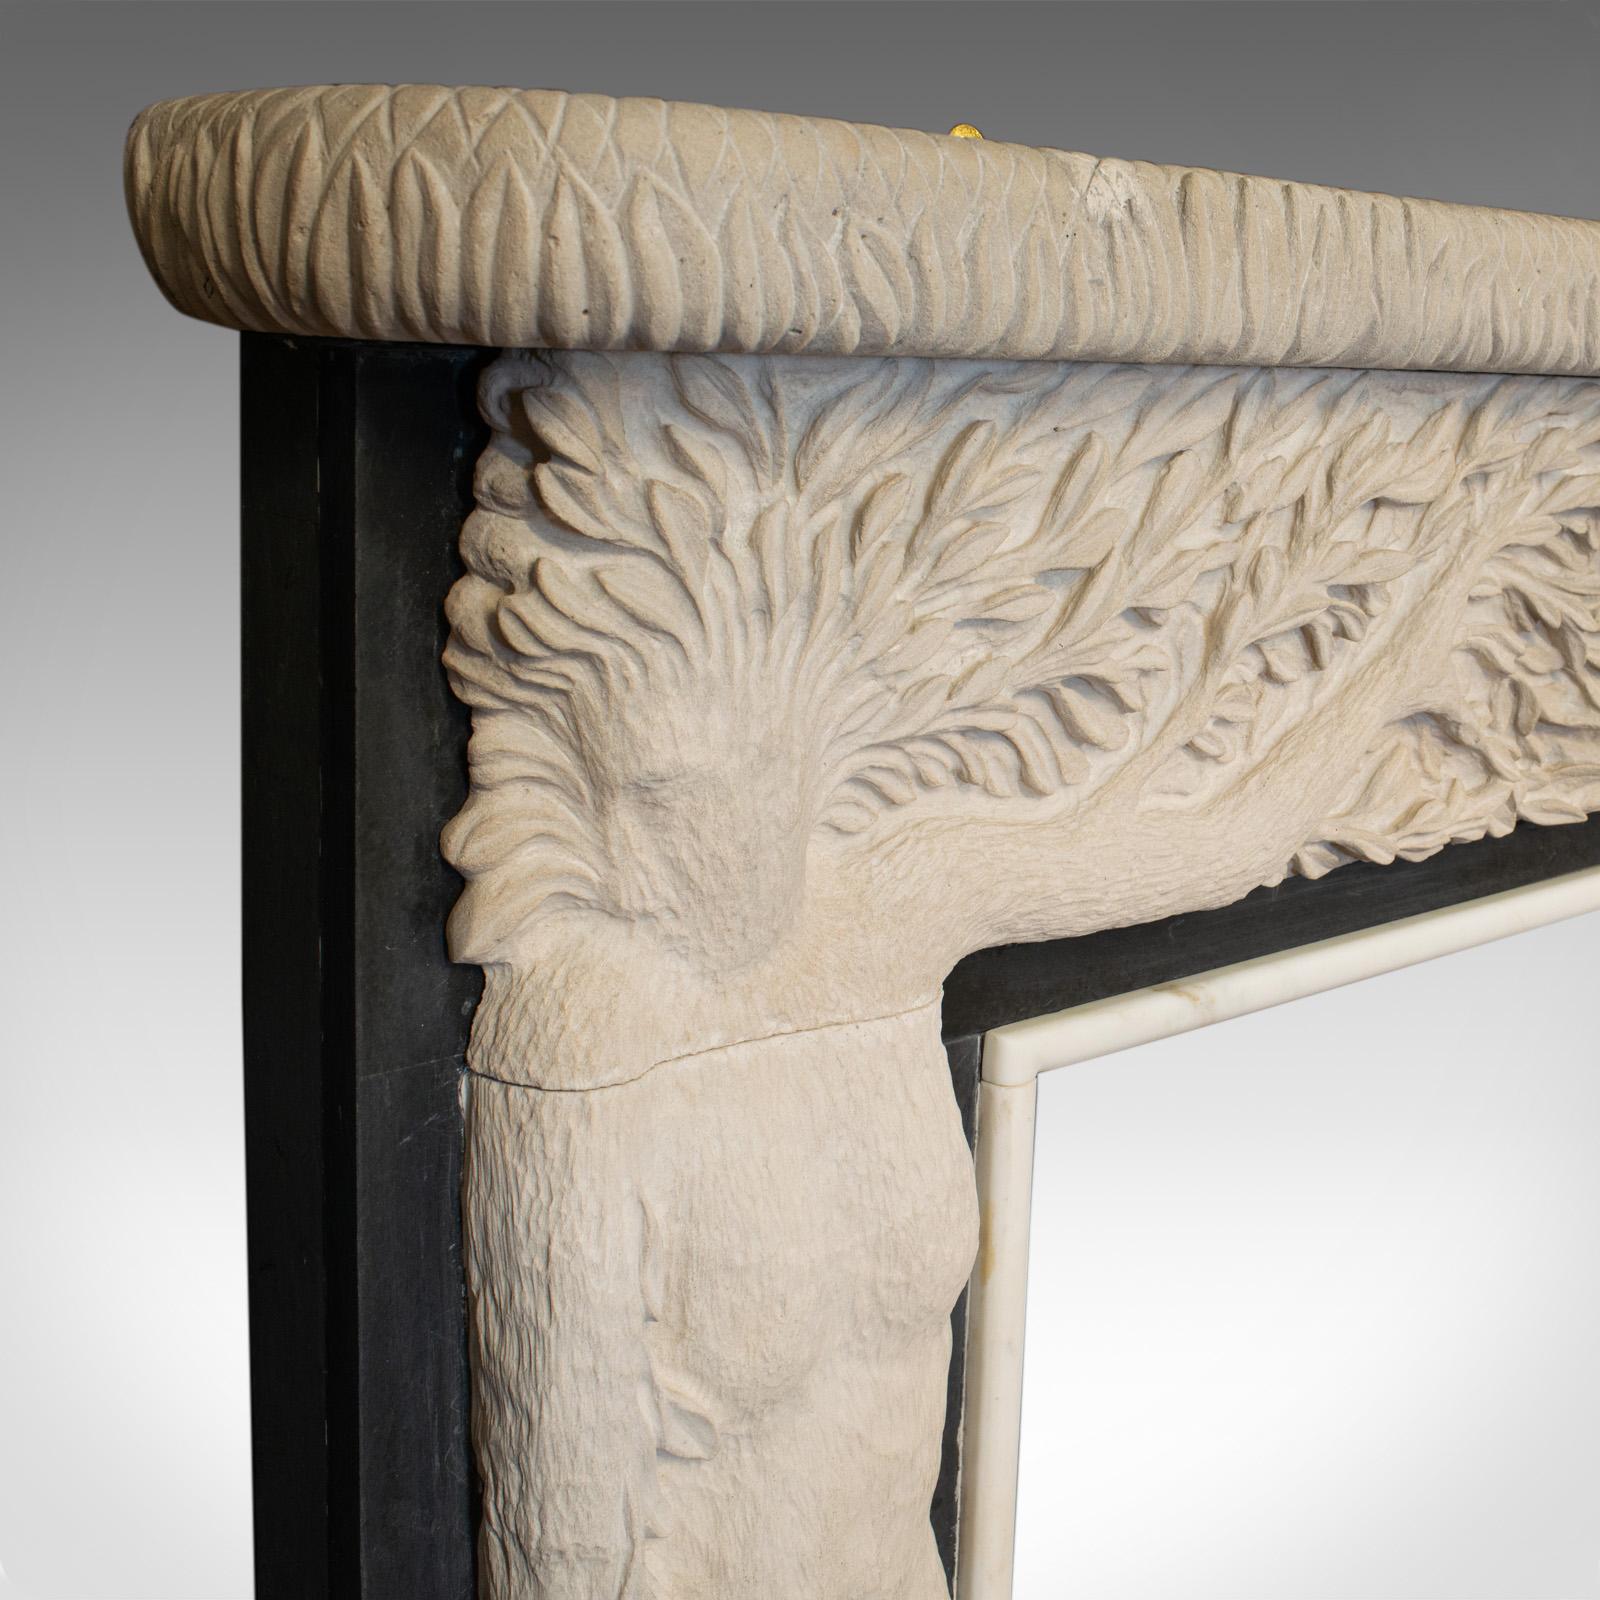 Hand-Carved Forest Decorative Fire Surround, Mantelpiece, English, Portland Stone Fireplace